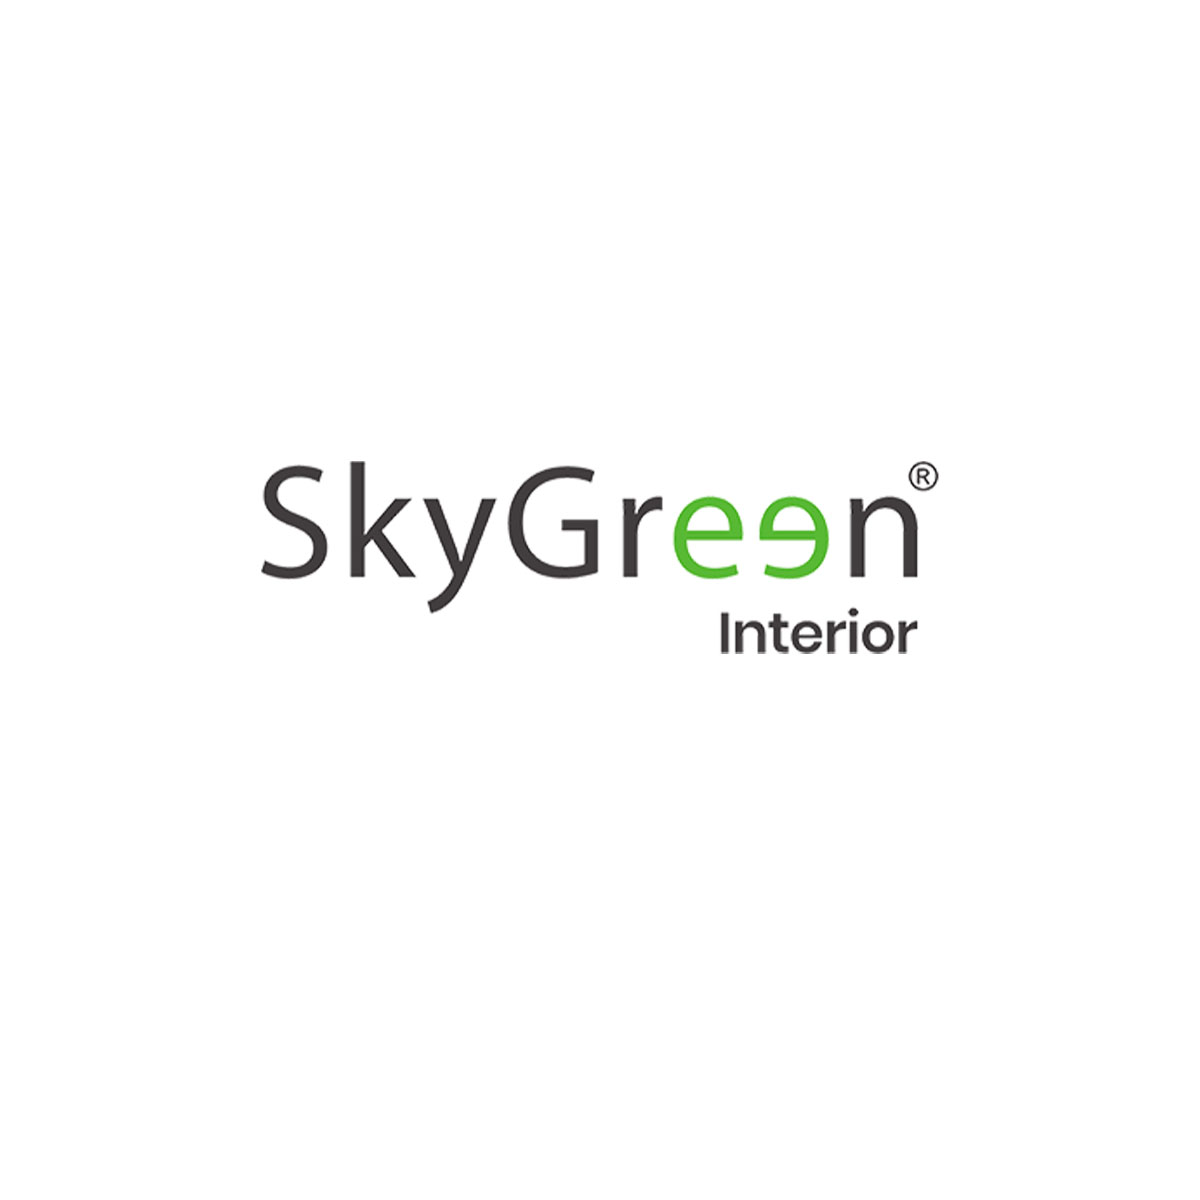 Skygreen Interior|IT Services|Professional Services